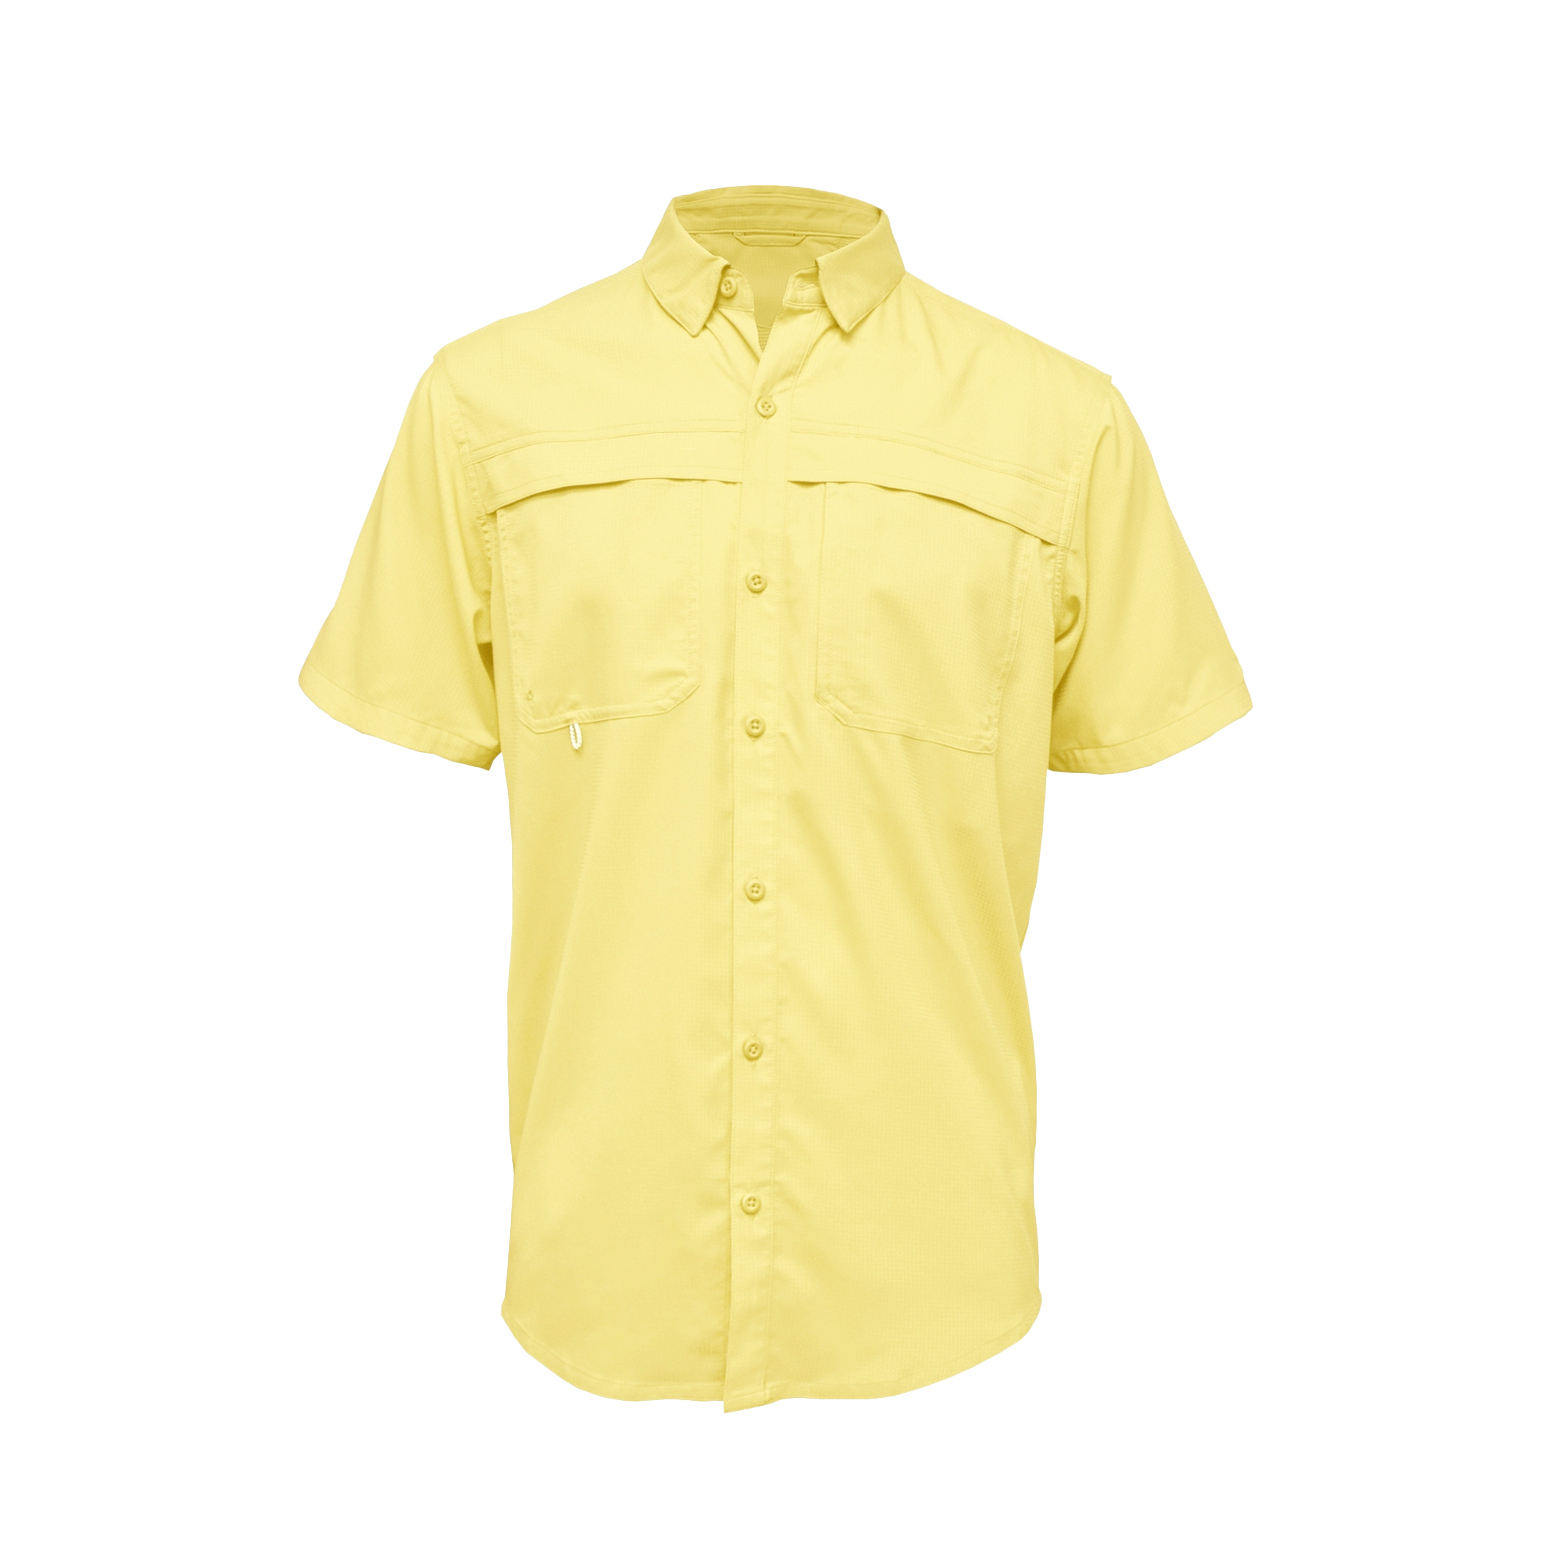 Men's Rugged Earth Outfitters Vented Yellow Short  Yellow shorts, Mens fishing  shirts, Fishing shirts